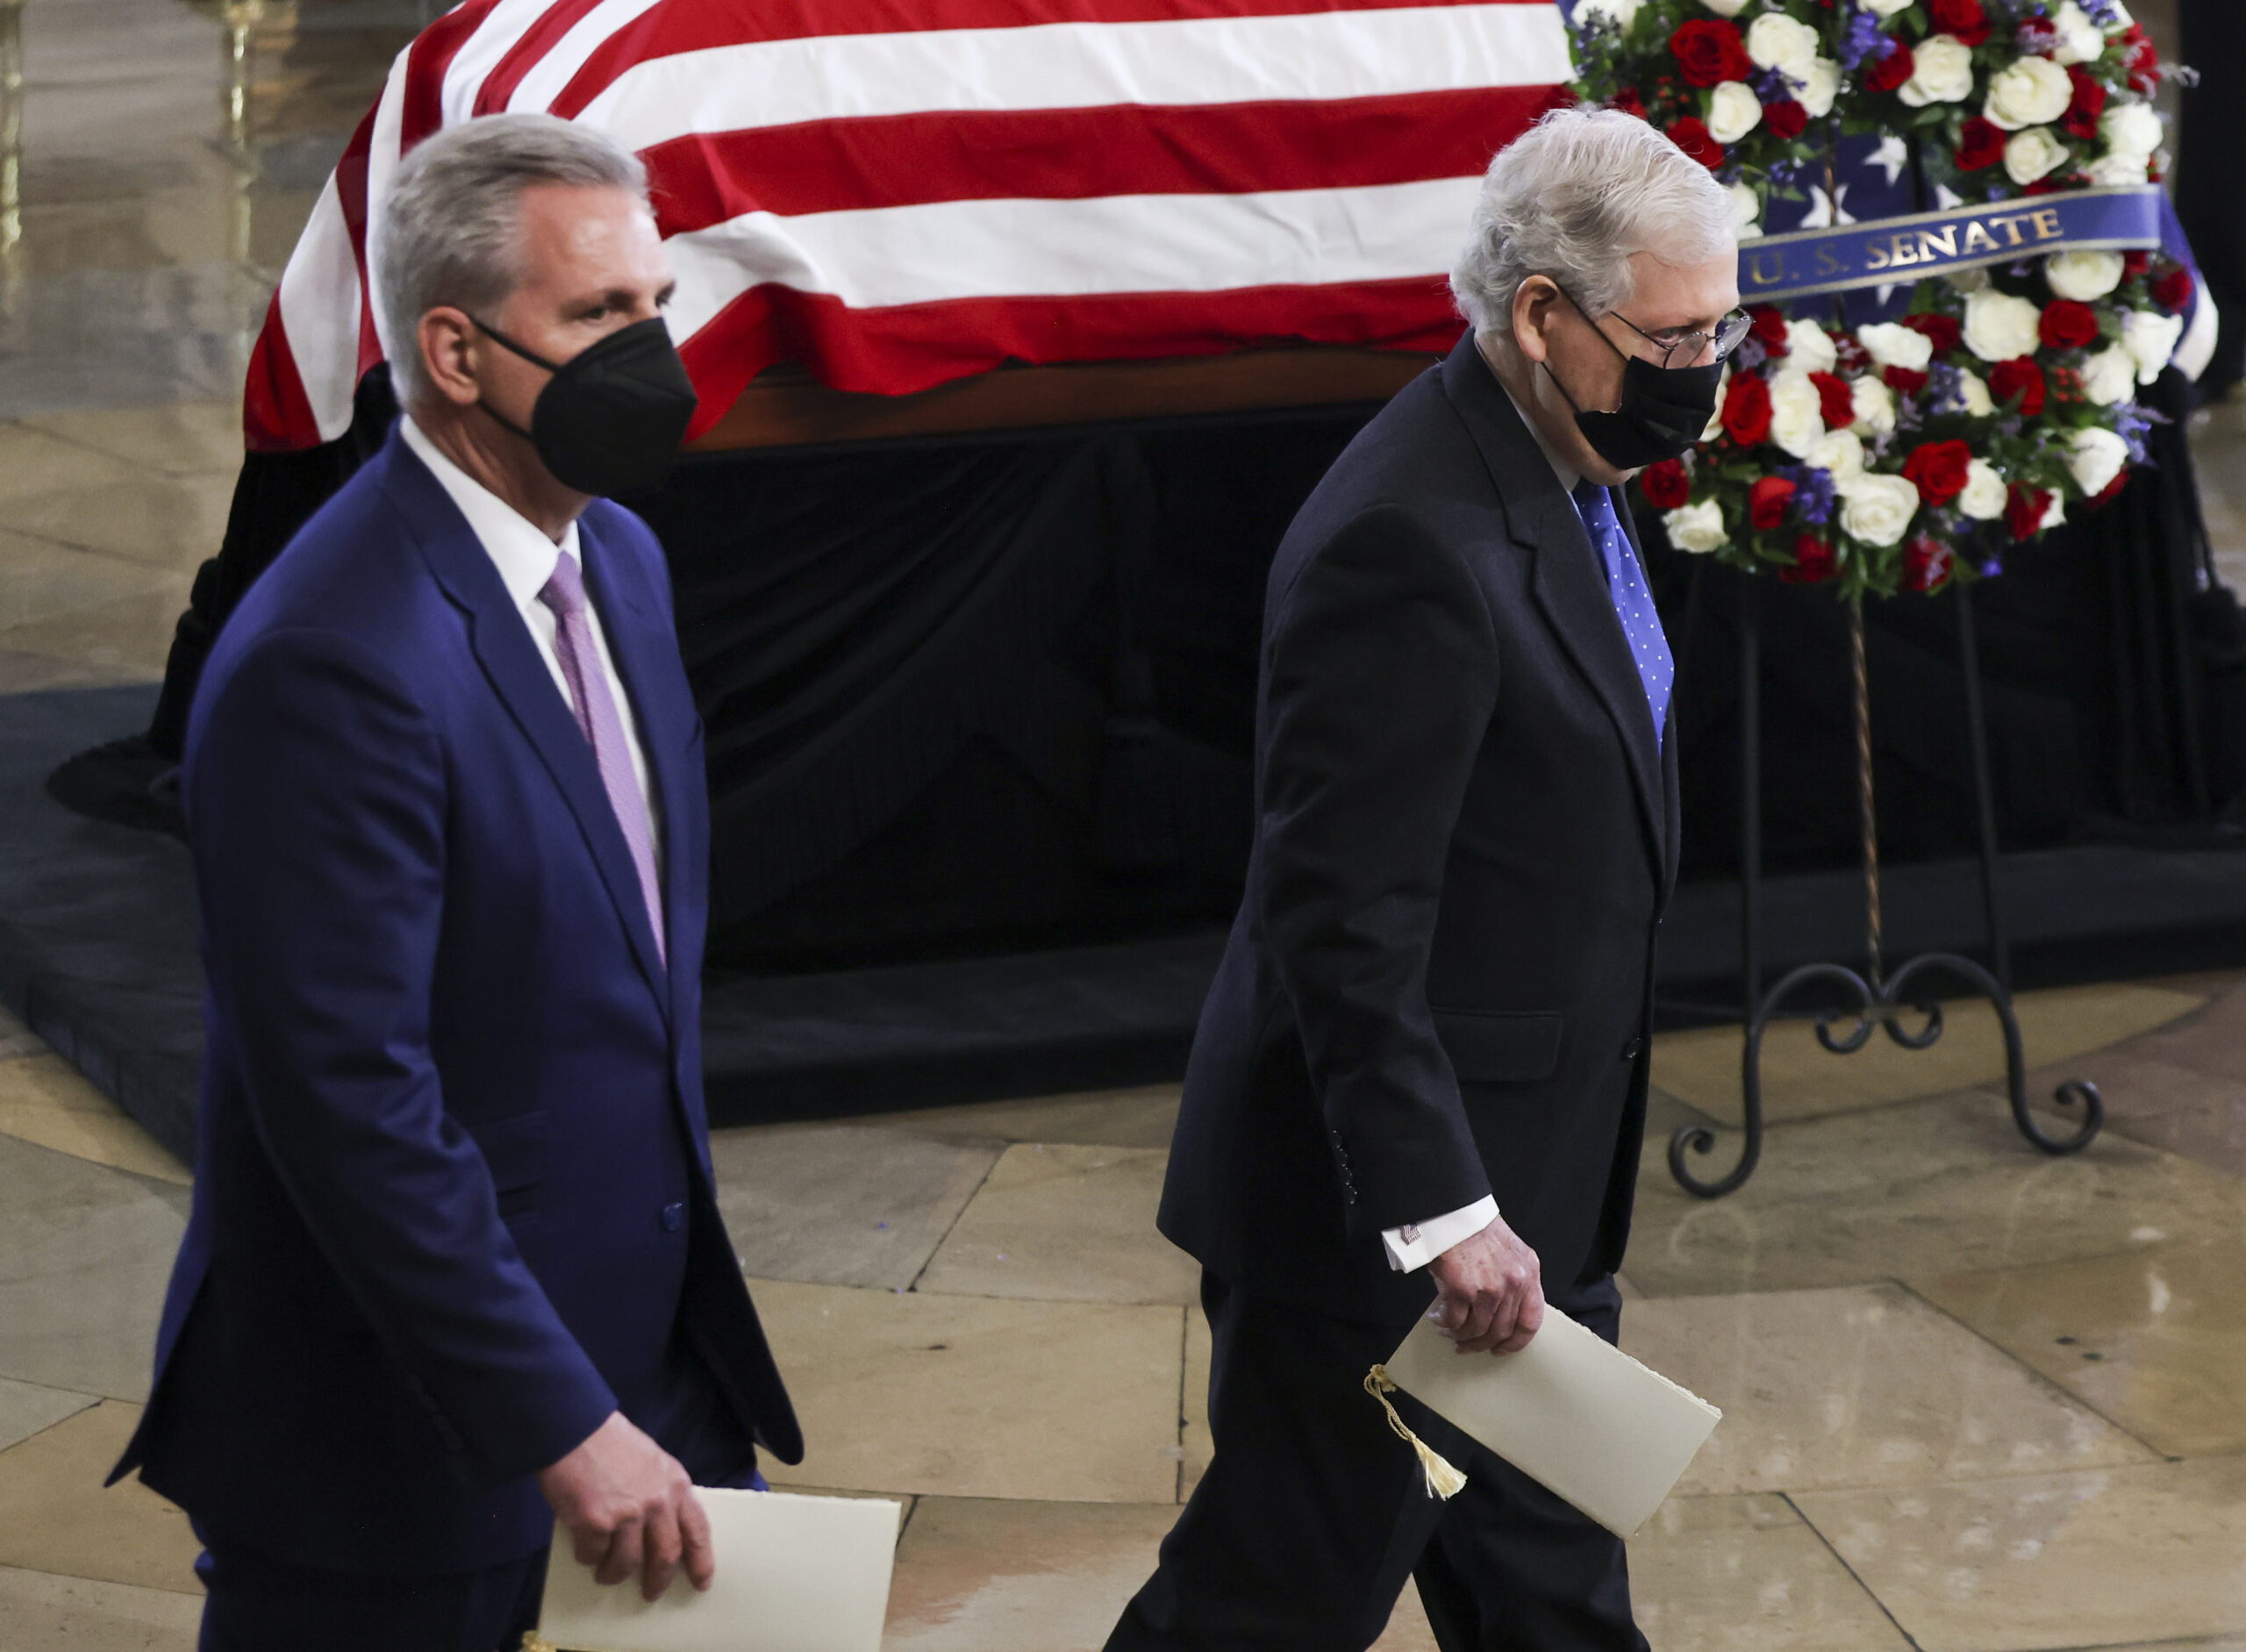 House Minority Leader Kevin McCarthy of Calif. and Senate Minority Leader Mitch McConnell of Ky., right, pay their respects to former Senate Majority Leader Harry Reid, D-Nev., during a memorial service in the Rotunda of the U.S. Capitol as Reid lies in state, Wednesday, Jan. 12, 2022, in Washington. (Evelyn Hockstein/Pool via AP)